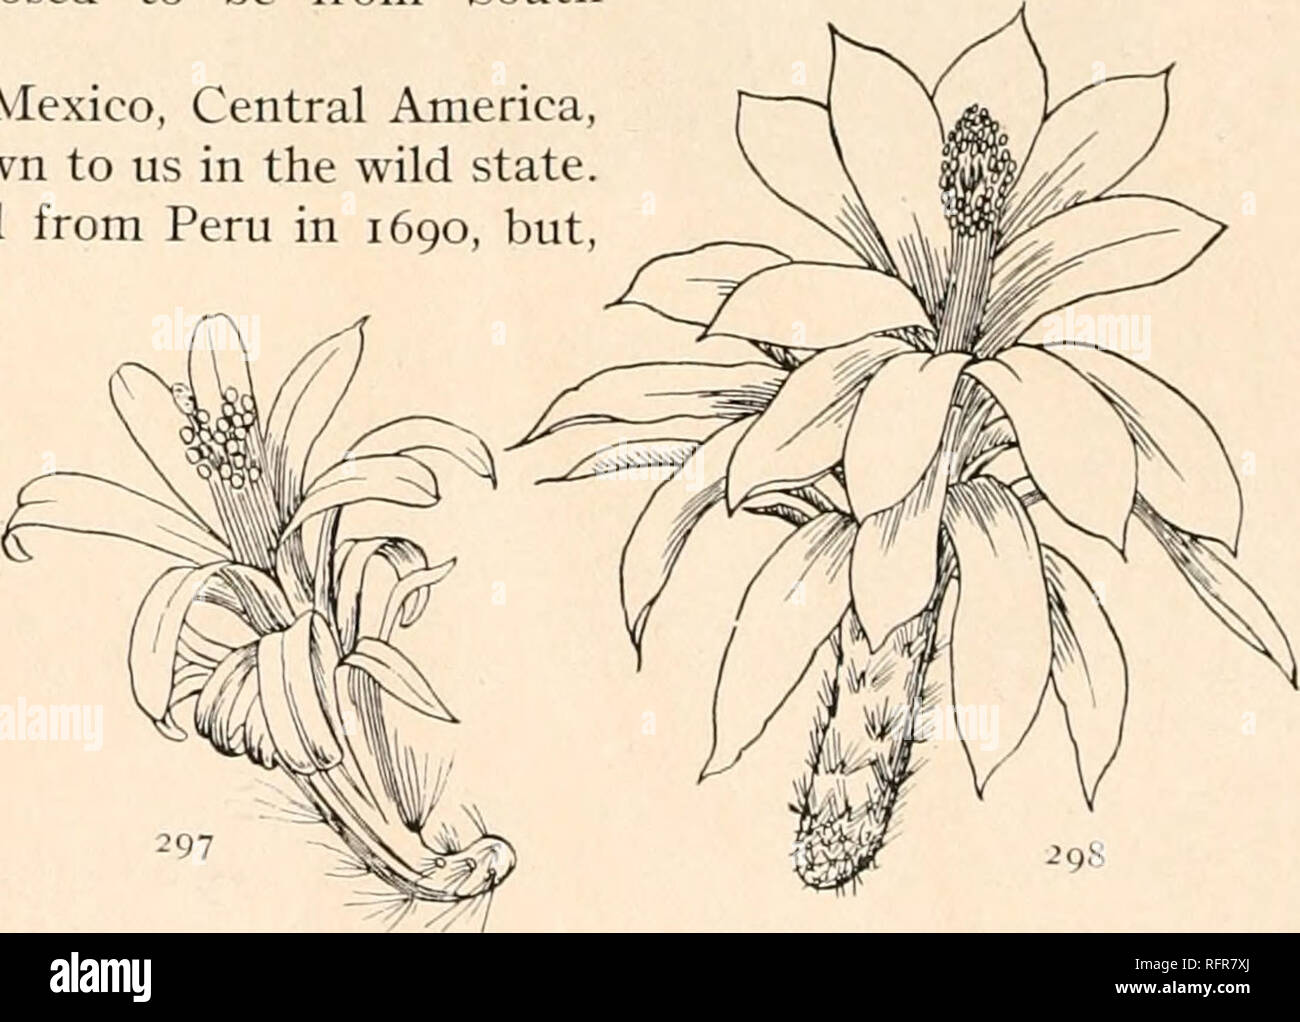 . Carnegie Institution of Washington publication. 218 THE CACTACEAE. 1. Aporocactus leptophis f De Candolle) Britton and Rose, Contr. U. S. Nat. Herb. 12: 435. 1909. 1'i-ri-ii* li'f'ln/ili/s IV Caiidollc, Mi'-in. Mu«. Hist. Nat. Paris 17: 117. 1828. &lt;'f7v;o flagelliformis li'l'lnfhis Schumann, Gesamtb. Kuktccn 143. 1897. (Jften creeping; branches cylindric, 8 to 10 mm. thick, rather strongly 7 or 8-ribbed; ribs obtuse, somewhat repand; areoles velvety, with 12 or 13 rigid setaceous spines; flower-tube curved just above the ovary; perianth-segments narrowly oblong, 2 to 3 cm. long, about 6 m Stock Photo